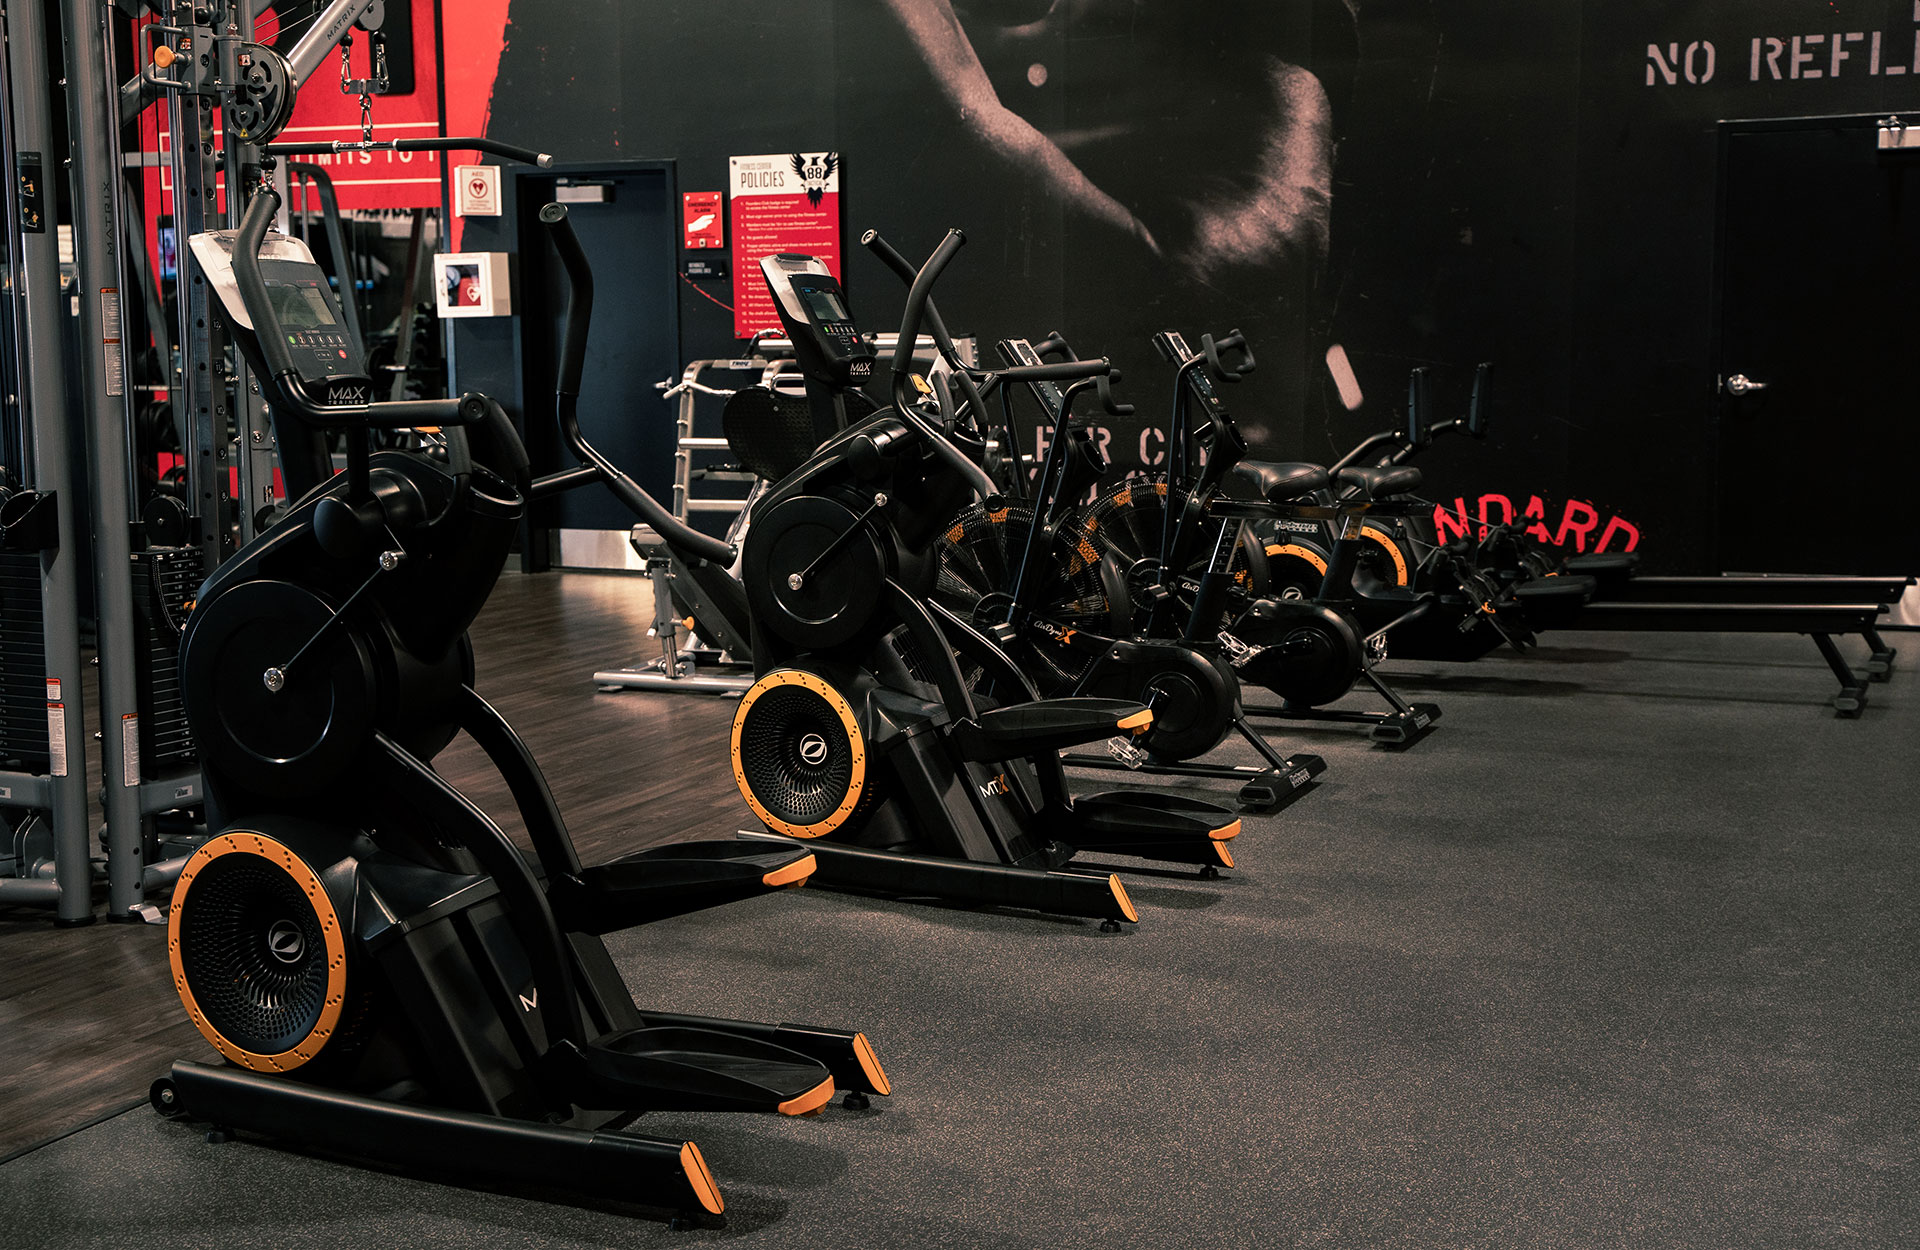 Exercise bike machines at the 88 Tactical fitness center